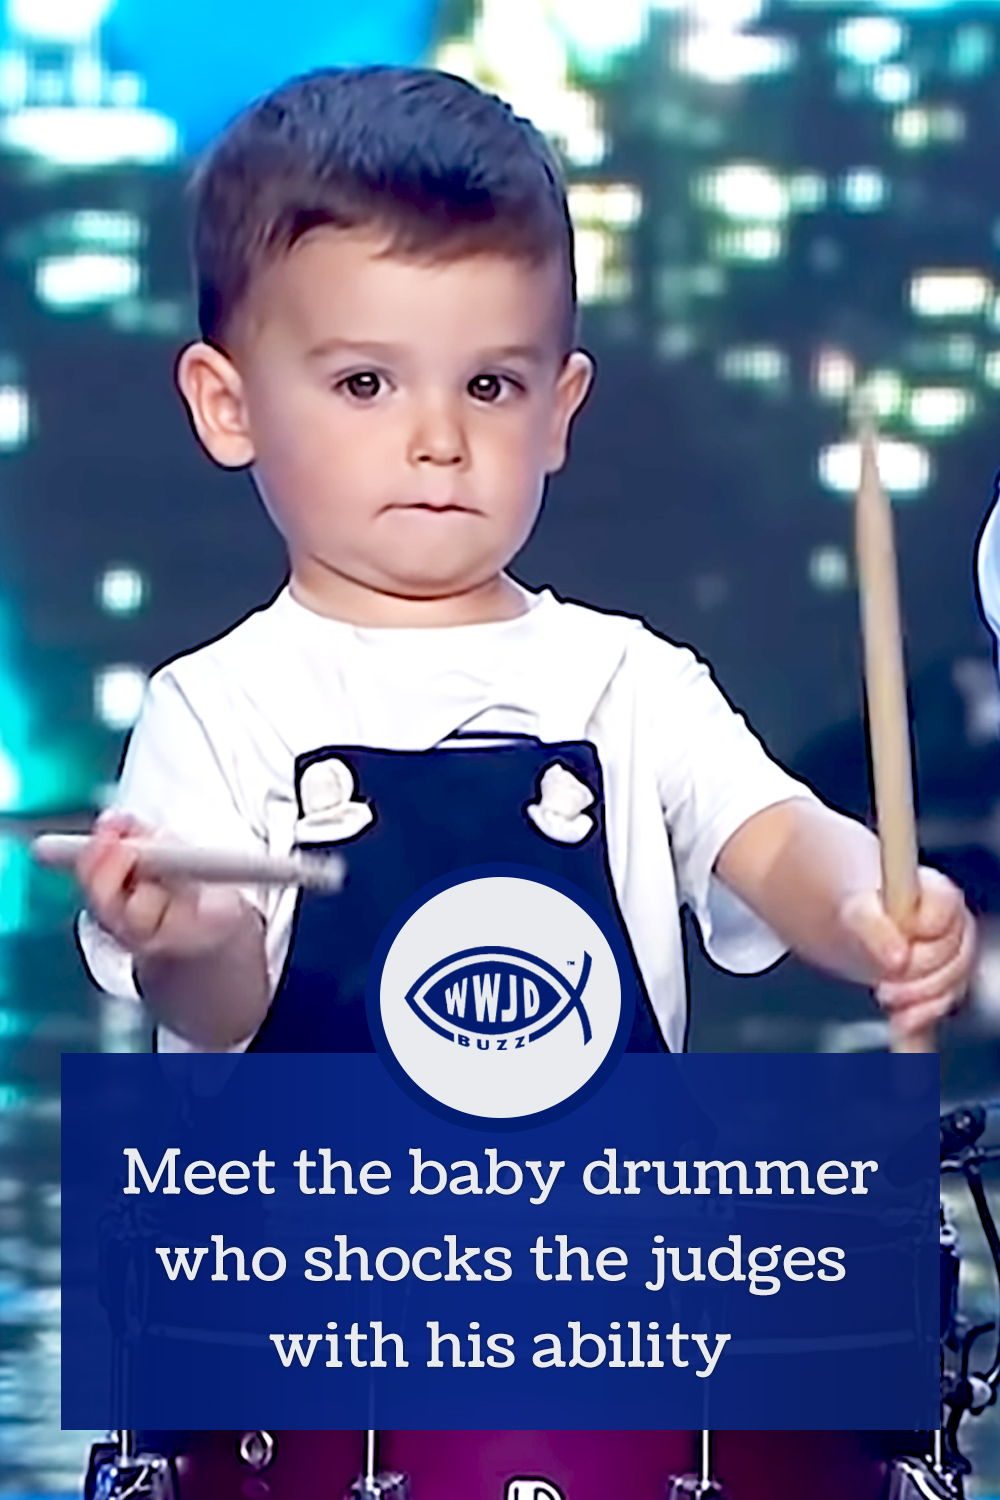 Meet the baby drummer who shocks the judges with his ability